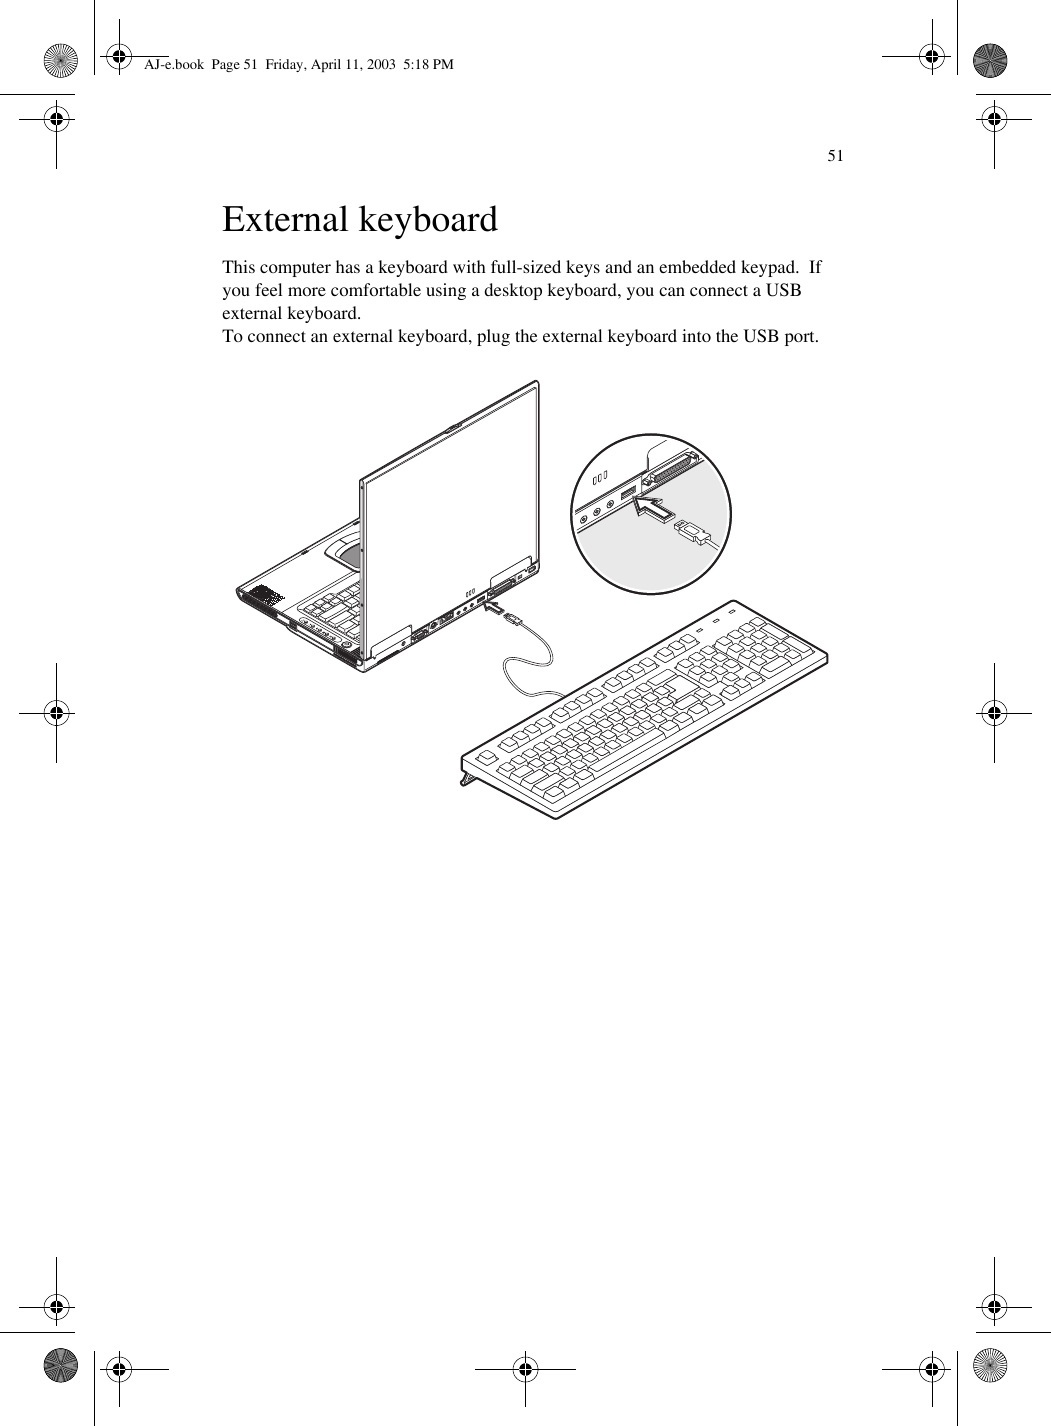 51External keyboardThis computer has a keyboard with full-sized keys and an embedded keypad.  If you feel more comfortable using a desktop keyboard, you can connect a USB external keyboard.To connect an external keyboard, plug the external keyboard into the USB port.AJ-e.book  Page 51  Friday, April 11, 2003  5:18 PM